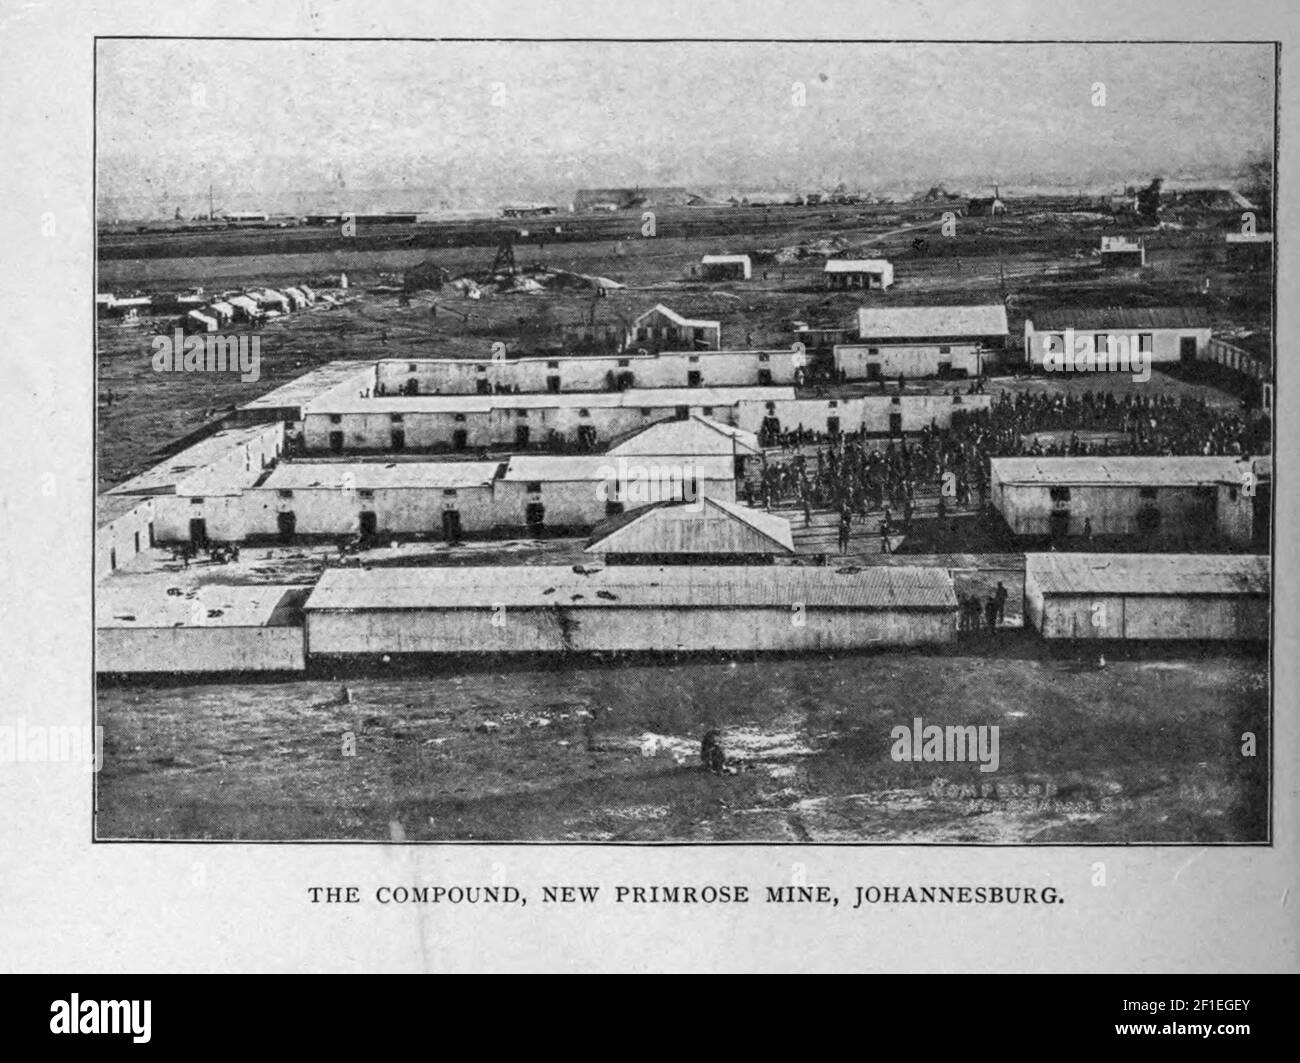 The Compound New Primrose Mine, Johannesburg from the book ' Boer and Britisher in South Africa; a history of the Boer-British war and the wars for United South Africa, together with biographies of the great men who made the history of South Africa ' By Neville, John Ormond Published by Thompson & Thomas, Chicago, USA in 1900 Stock Photo